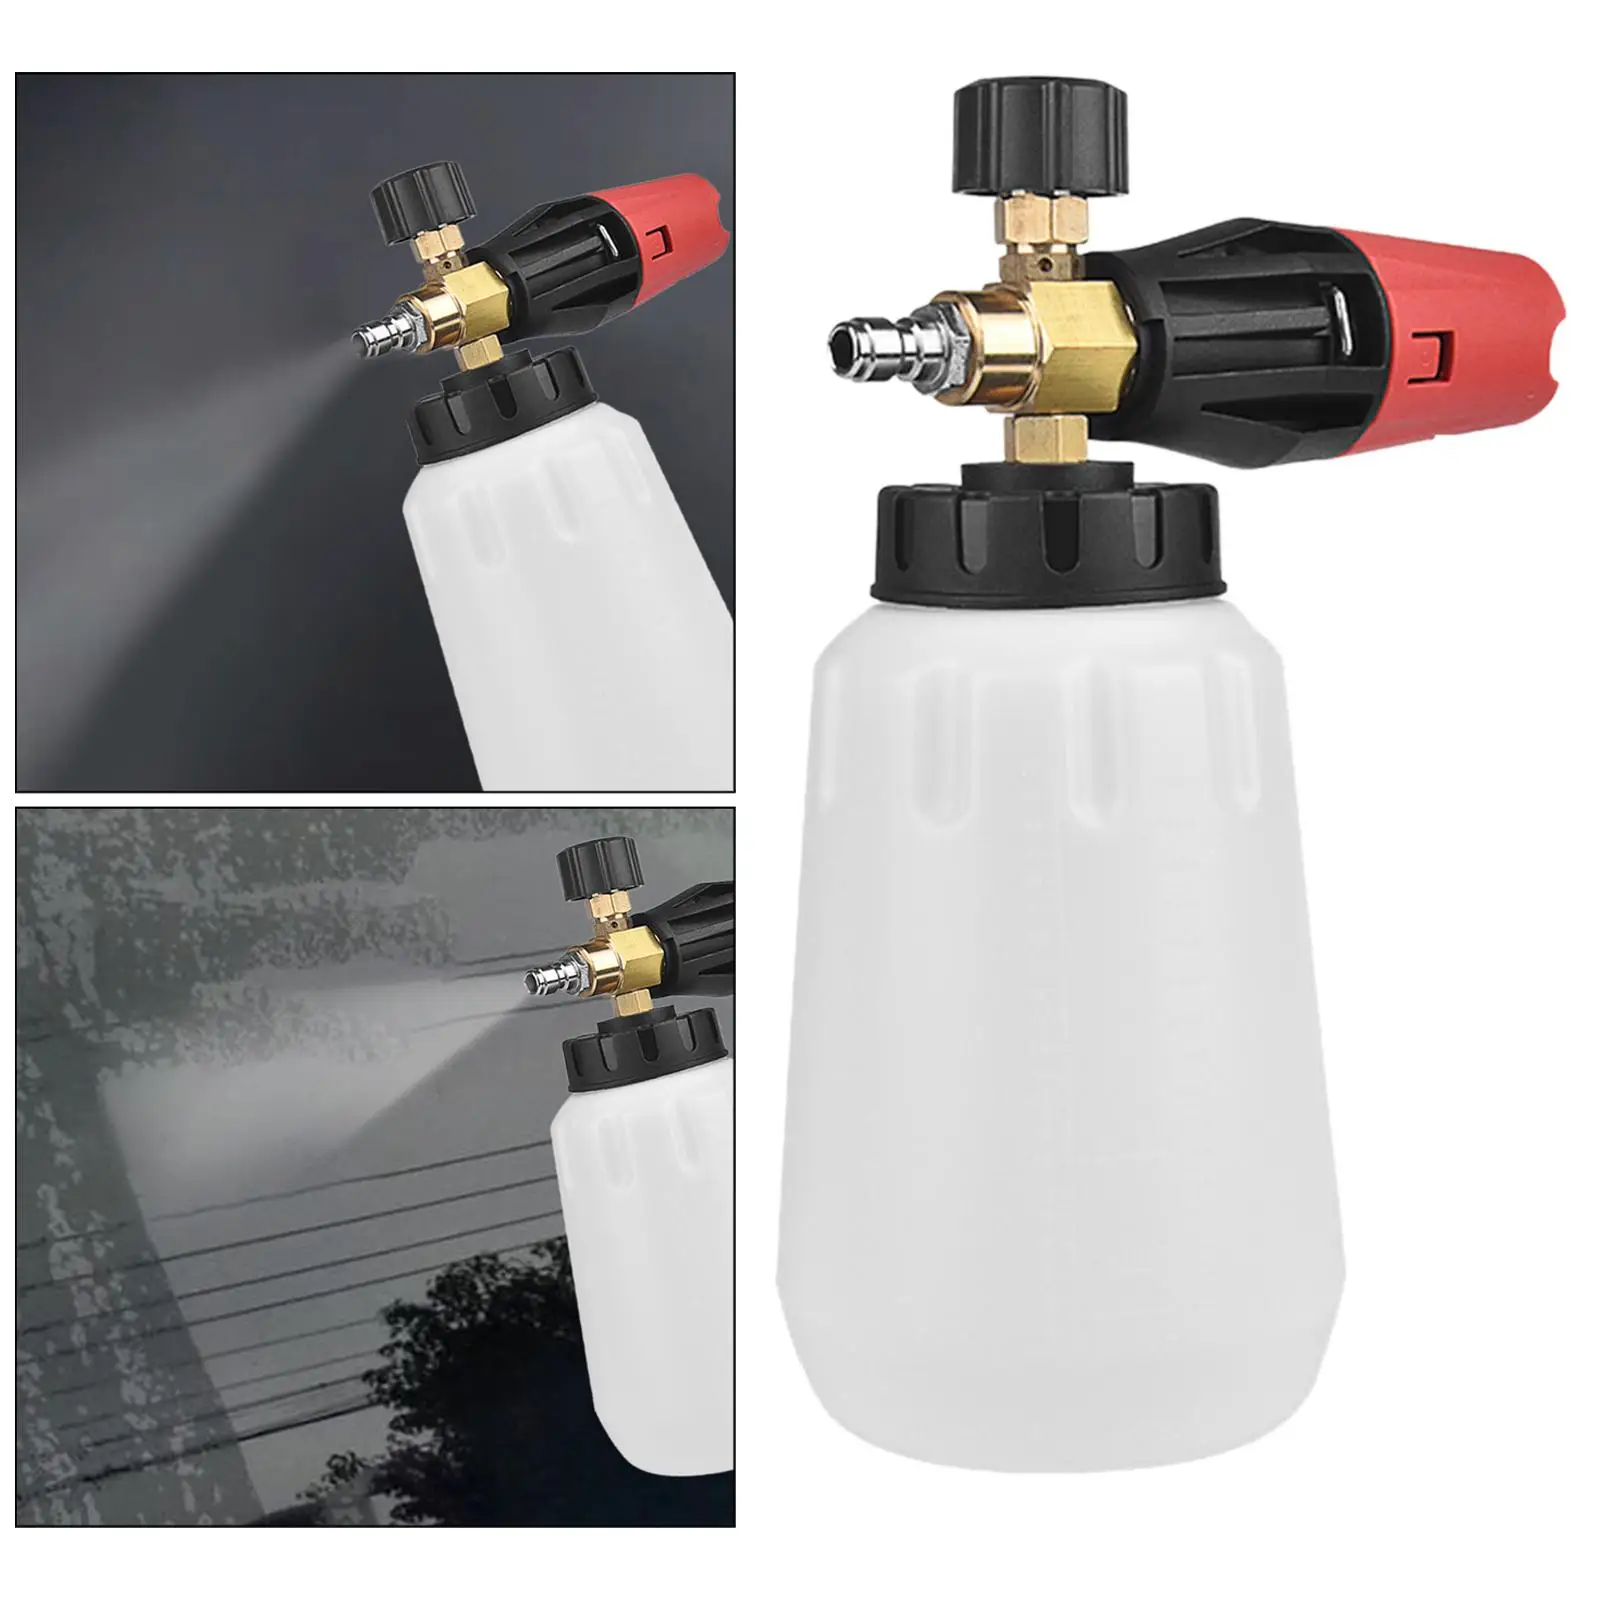 Professional Foaming Sprayer 1/4 inch Quick Connector Quick Release High Pressure Portable for Car Window Washing Garden Lawn